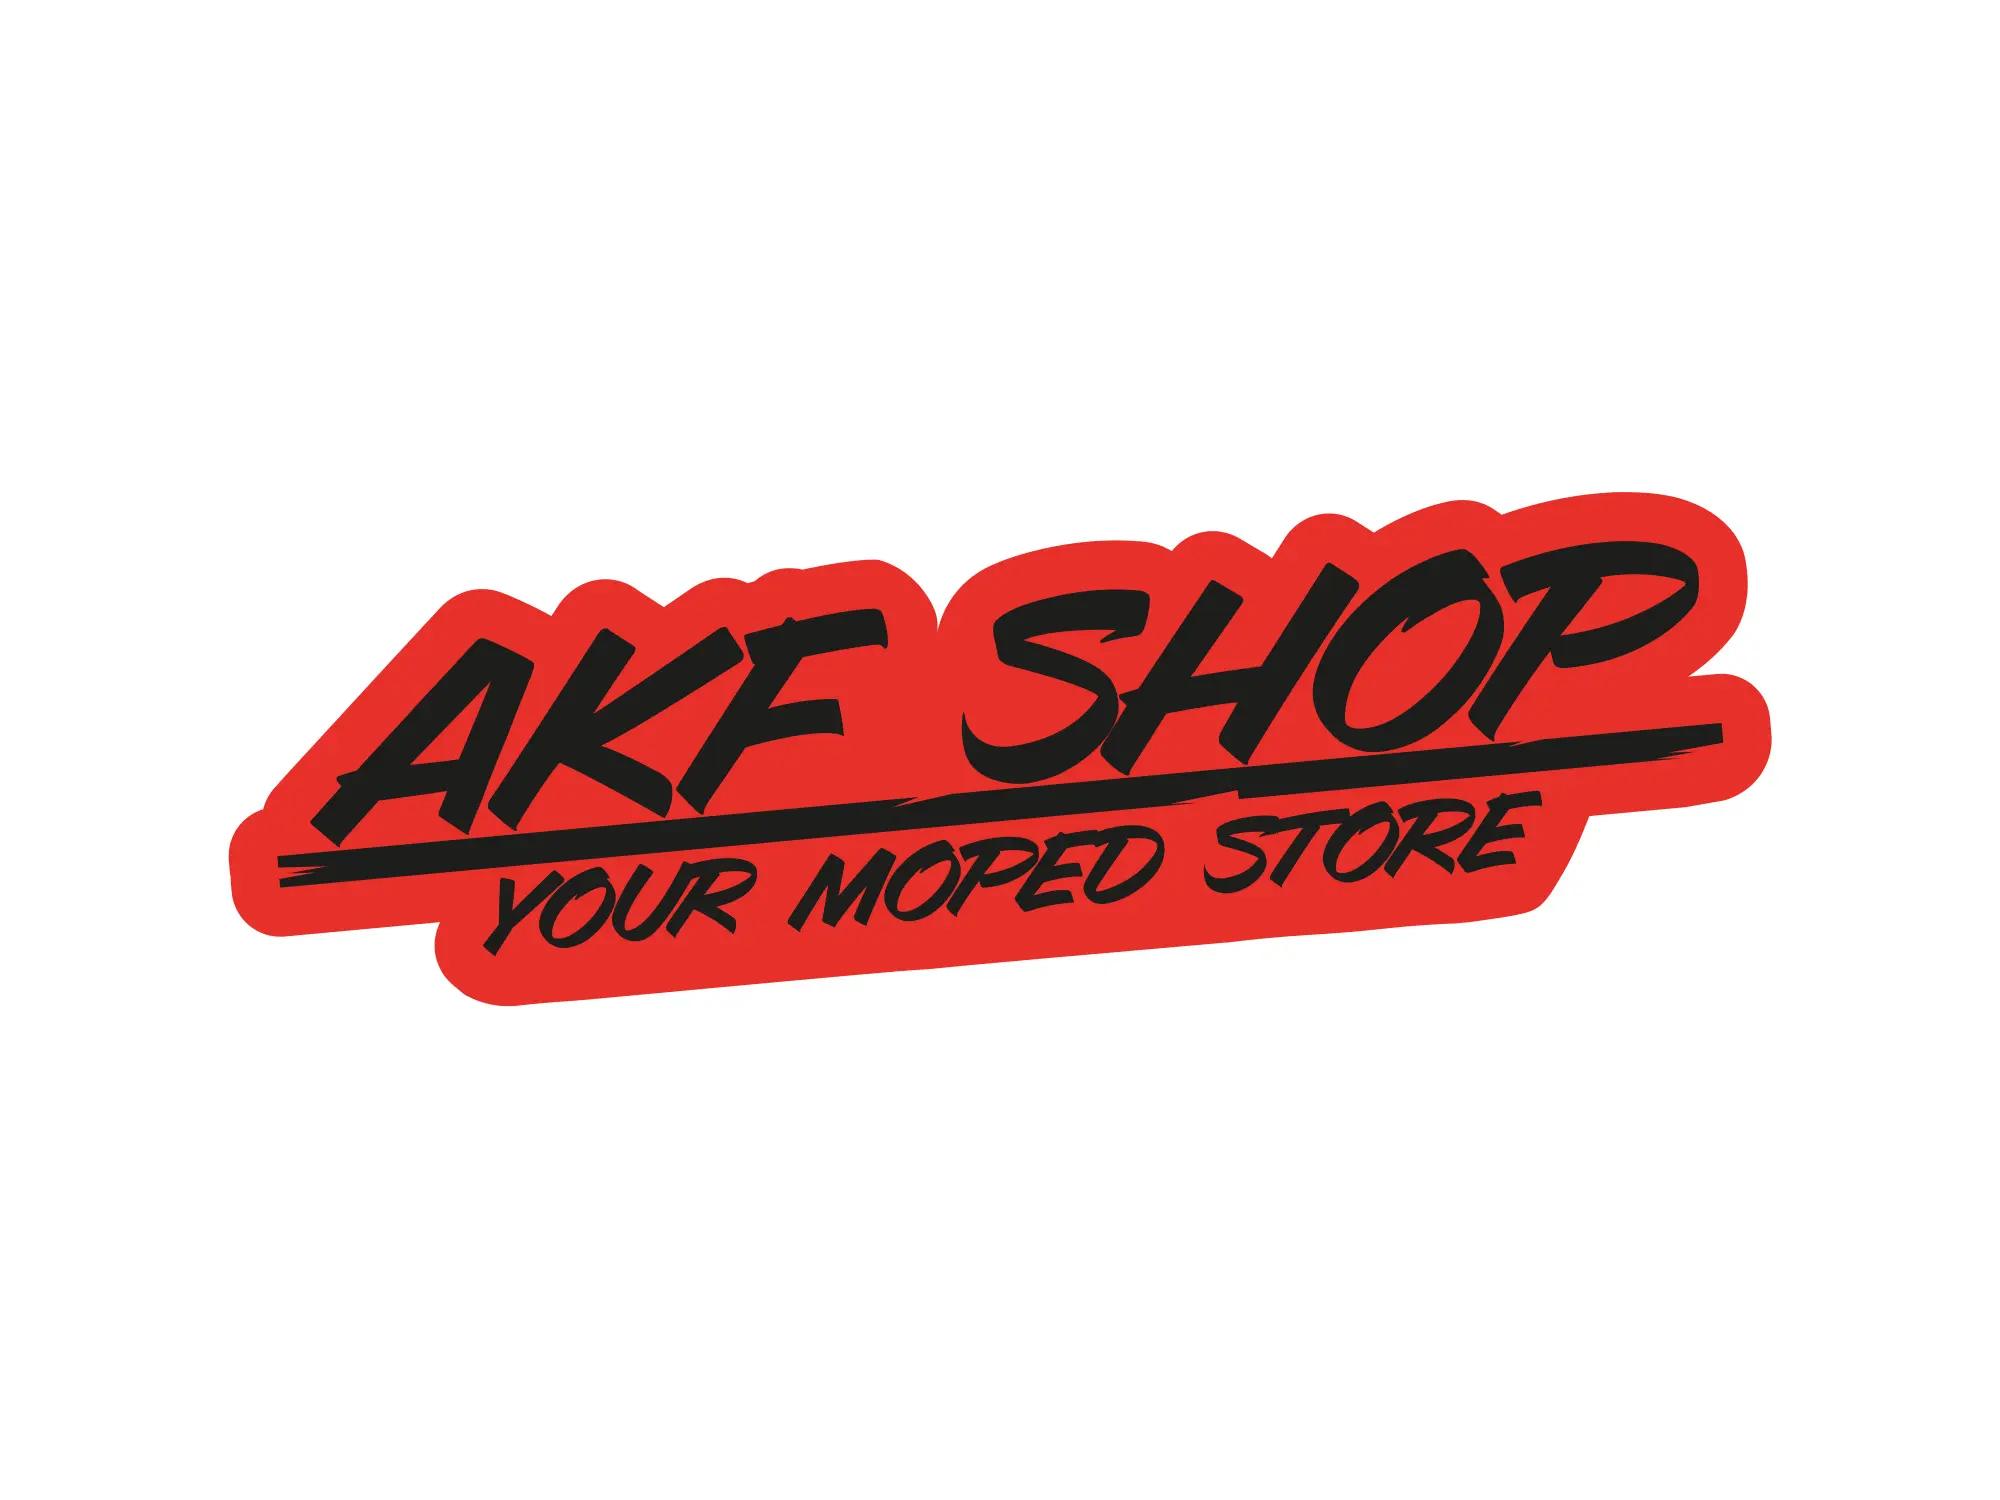 Sticker - AKF Shop - your moped store Red/Black, contour cut